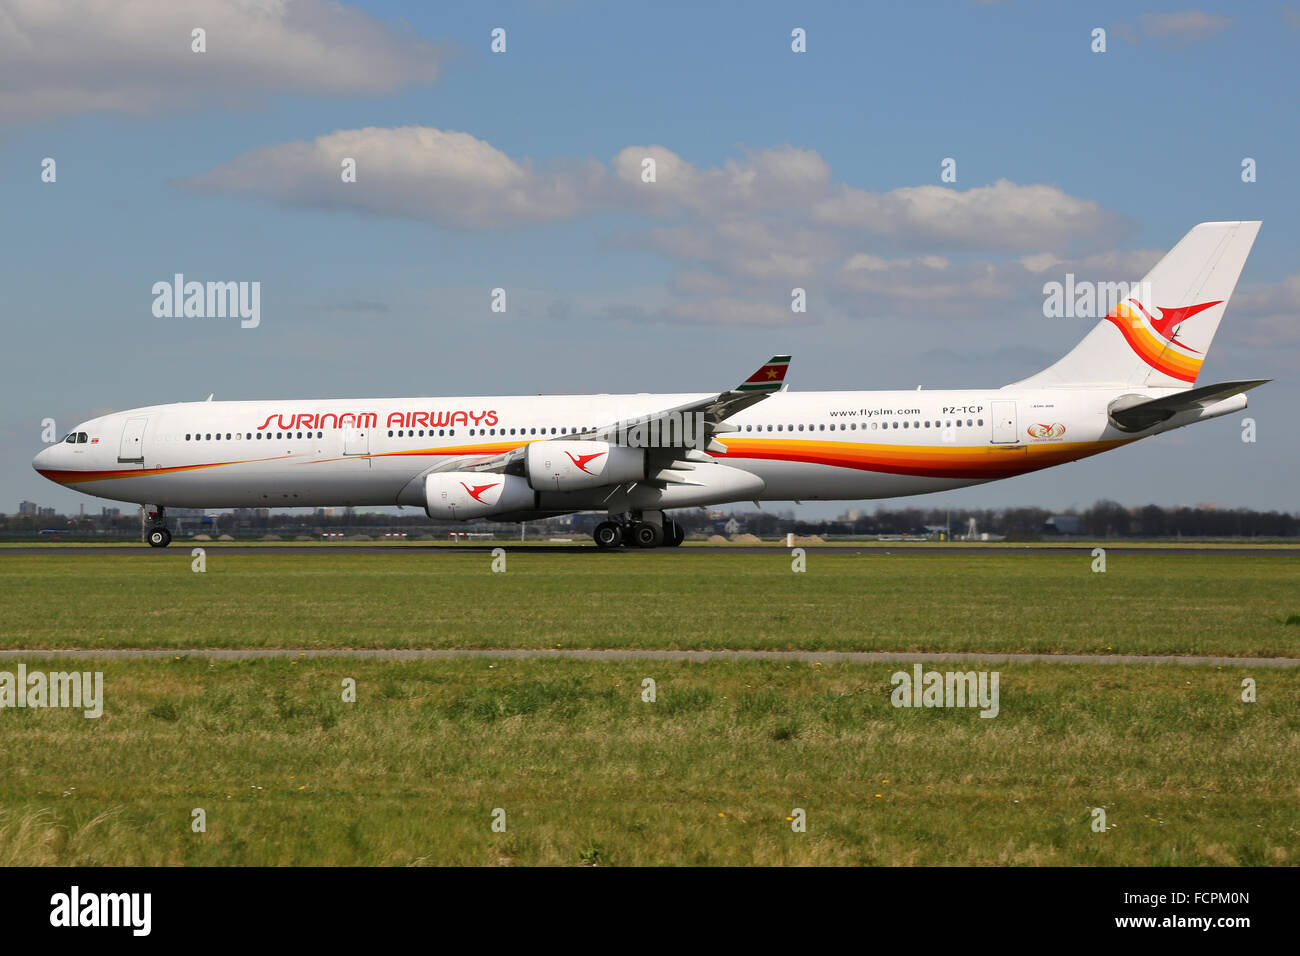 Amsterdam, Netherlands - April 19, 2015: A Surinam Airways Airbus A340 with the registration PZ-TCP taking off at Amsterdam Schi Stock Photo